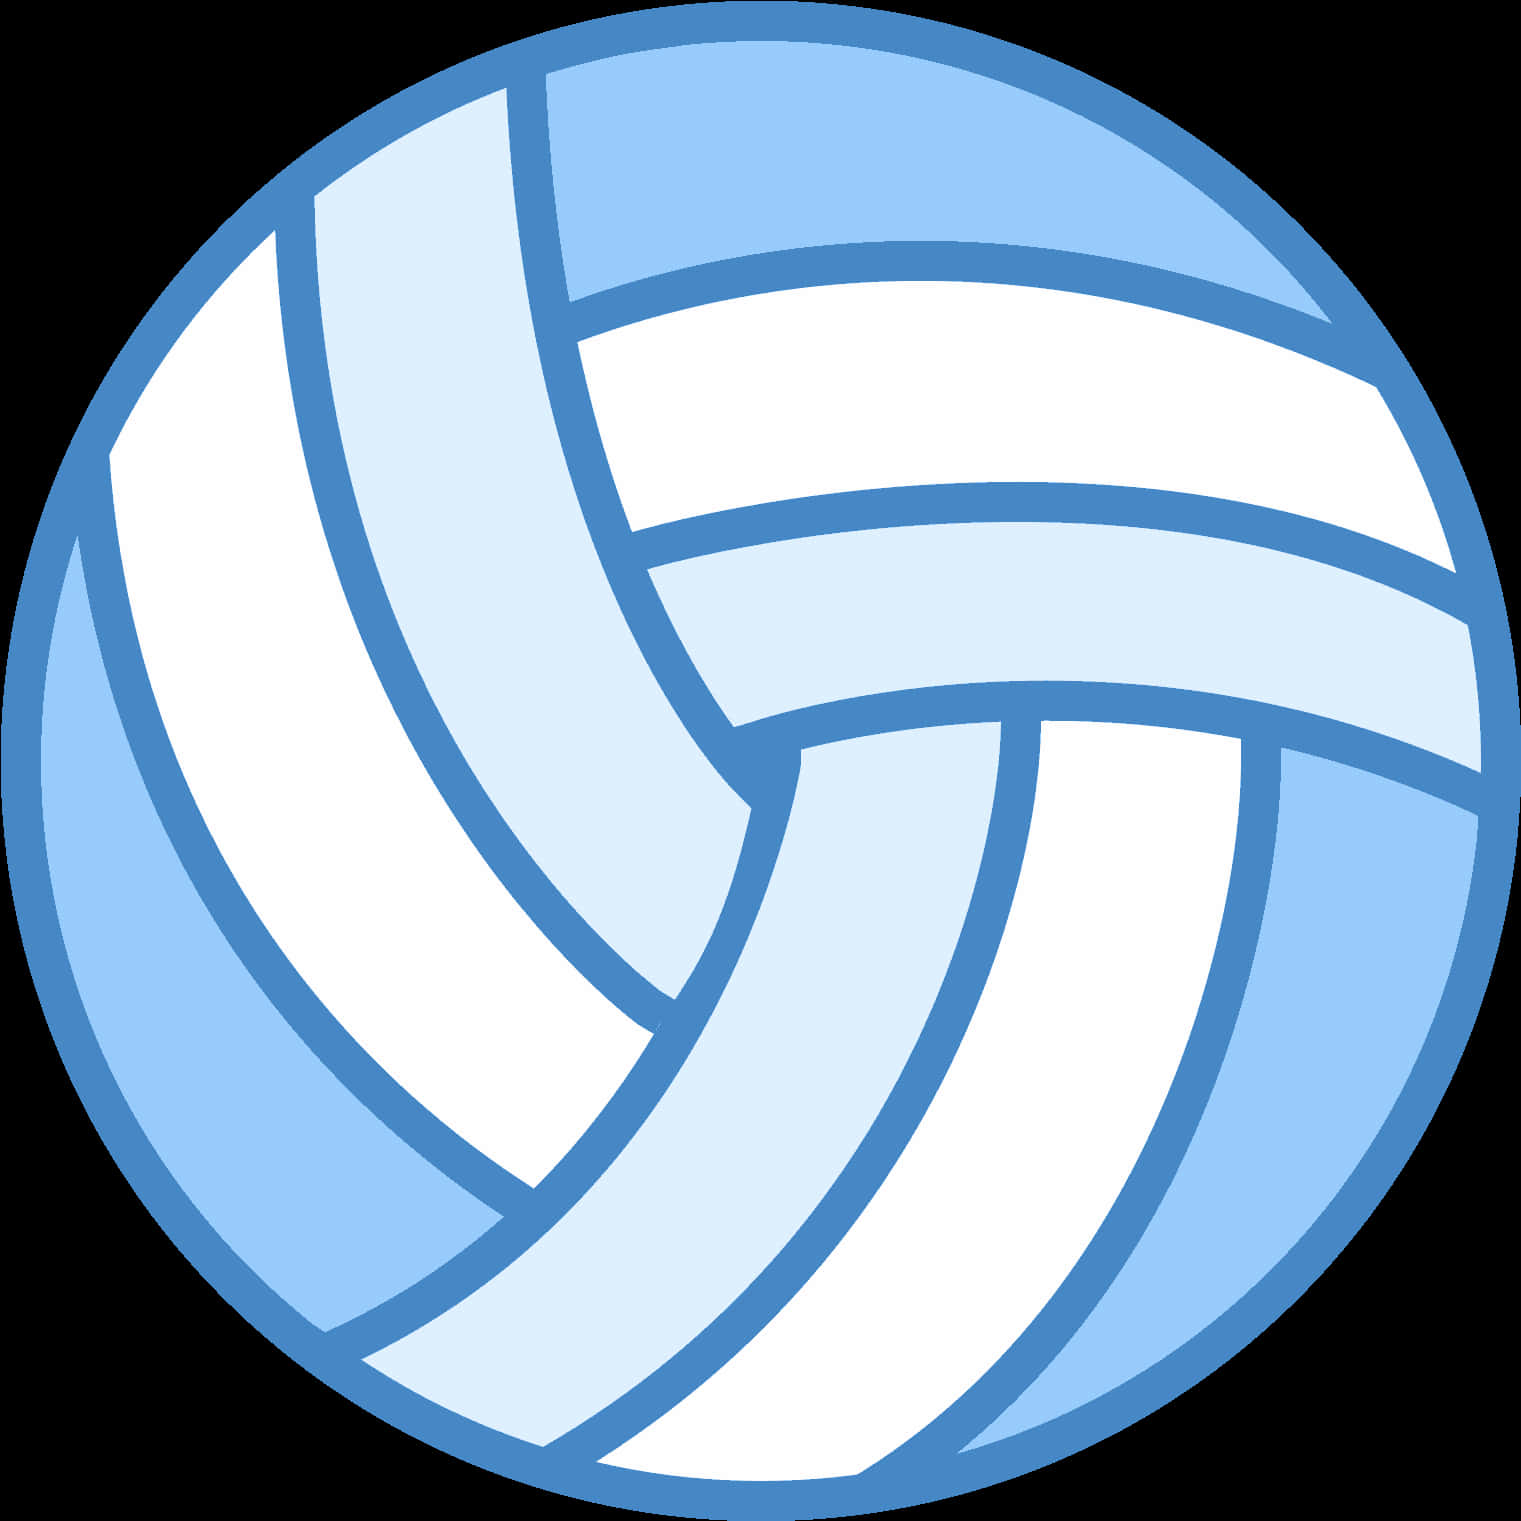 Download Stylized Volleyball Icon | Wallpapers.com